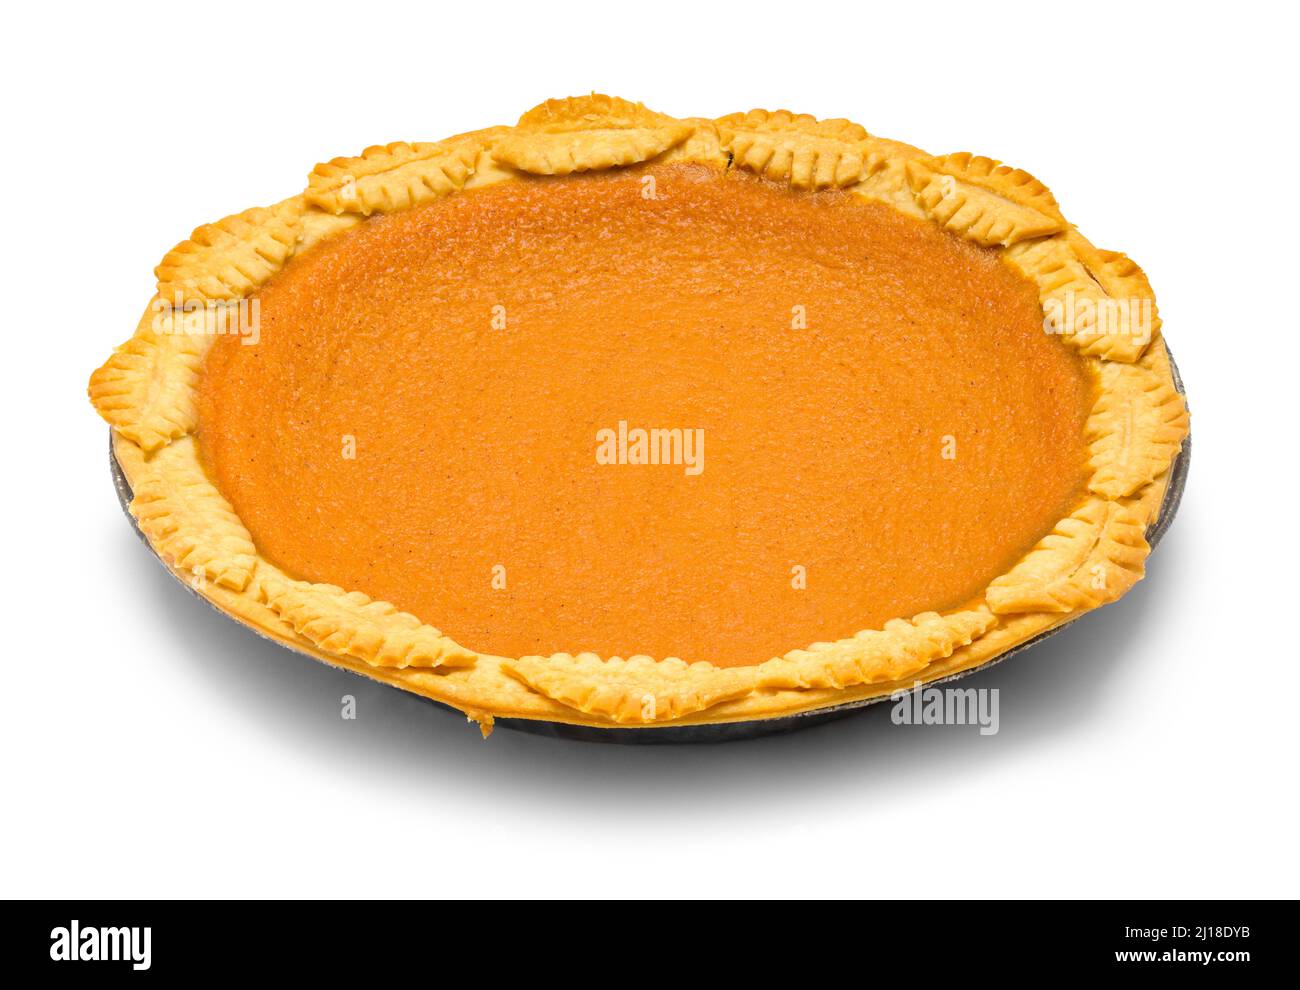 Homemade Pumpkin Pie Cut Out on White. Stock Photo